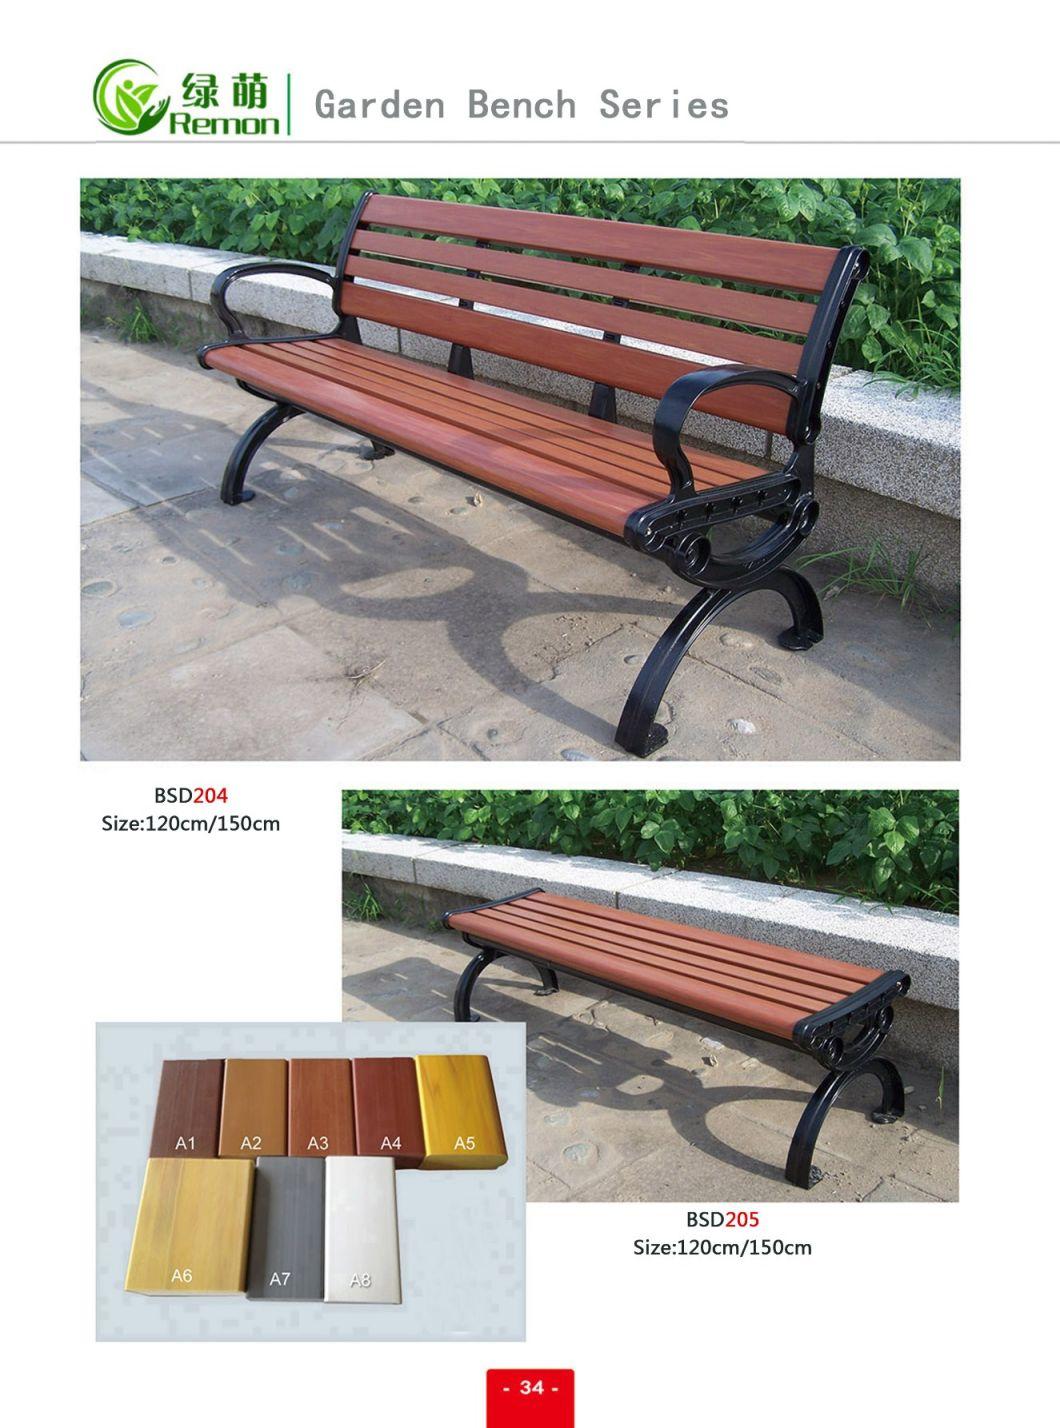 Outdoor Park Chair and Table, Garden Furniture